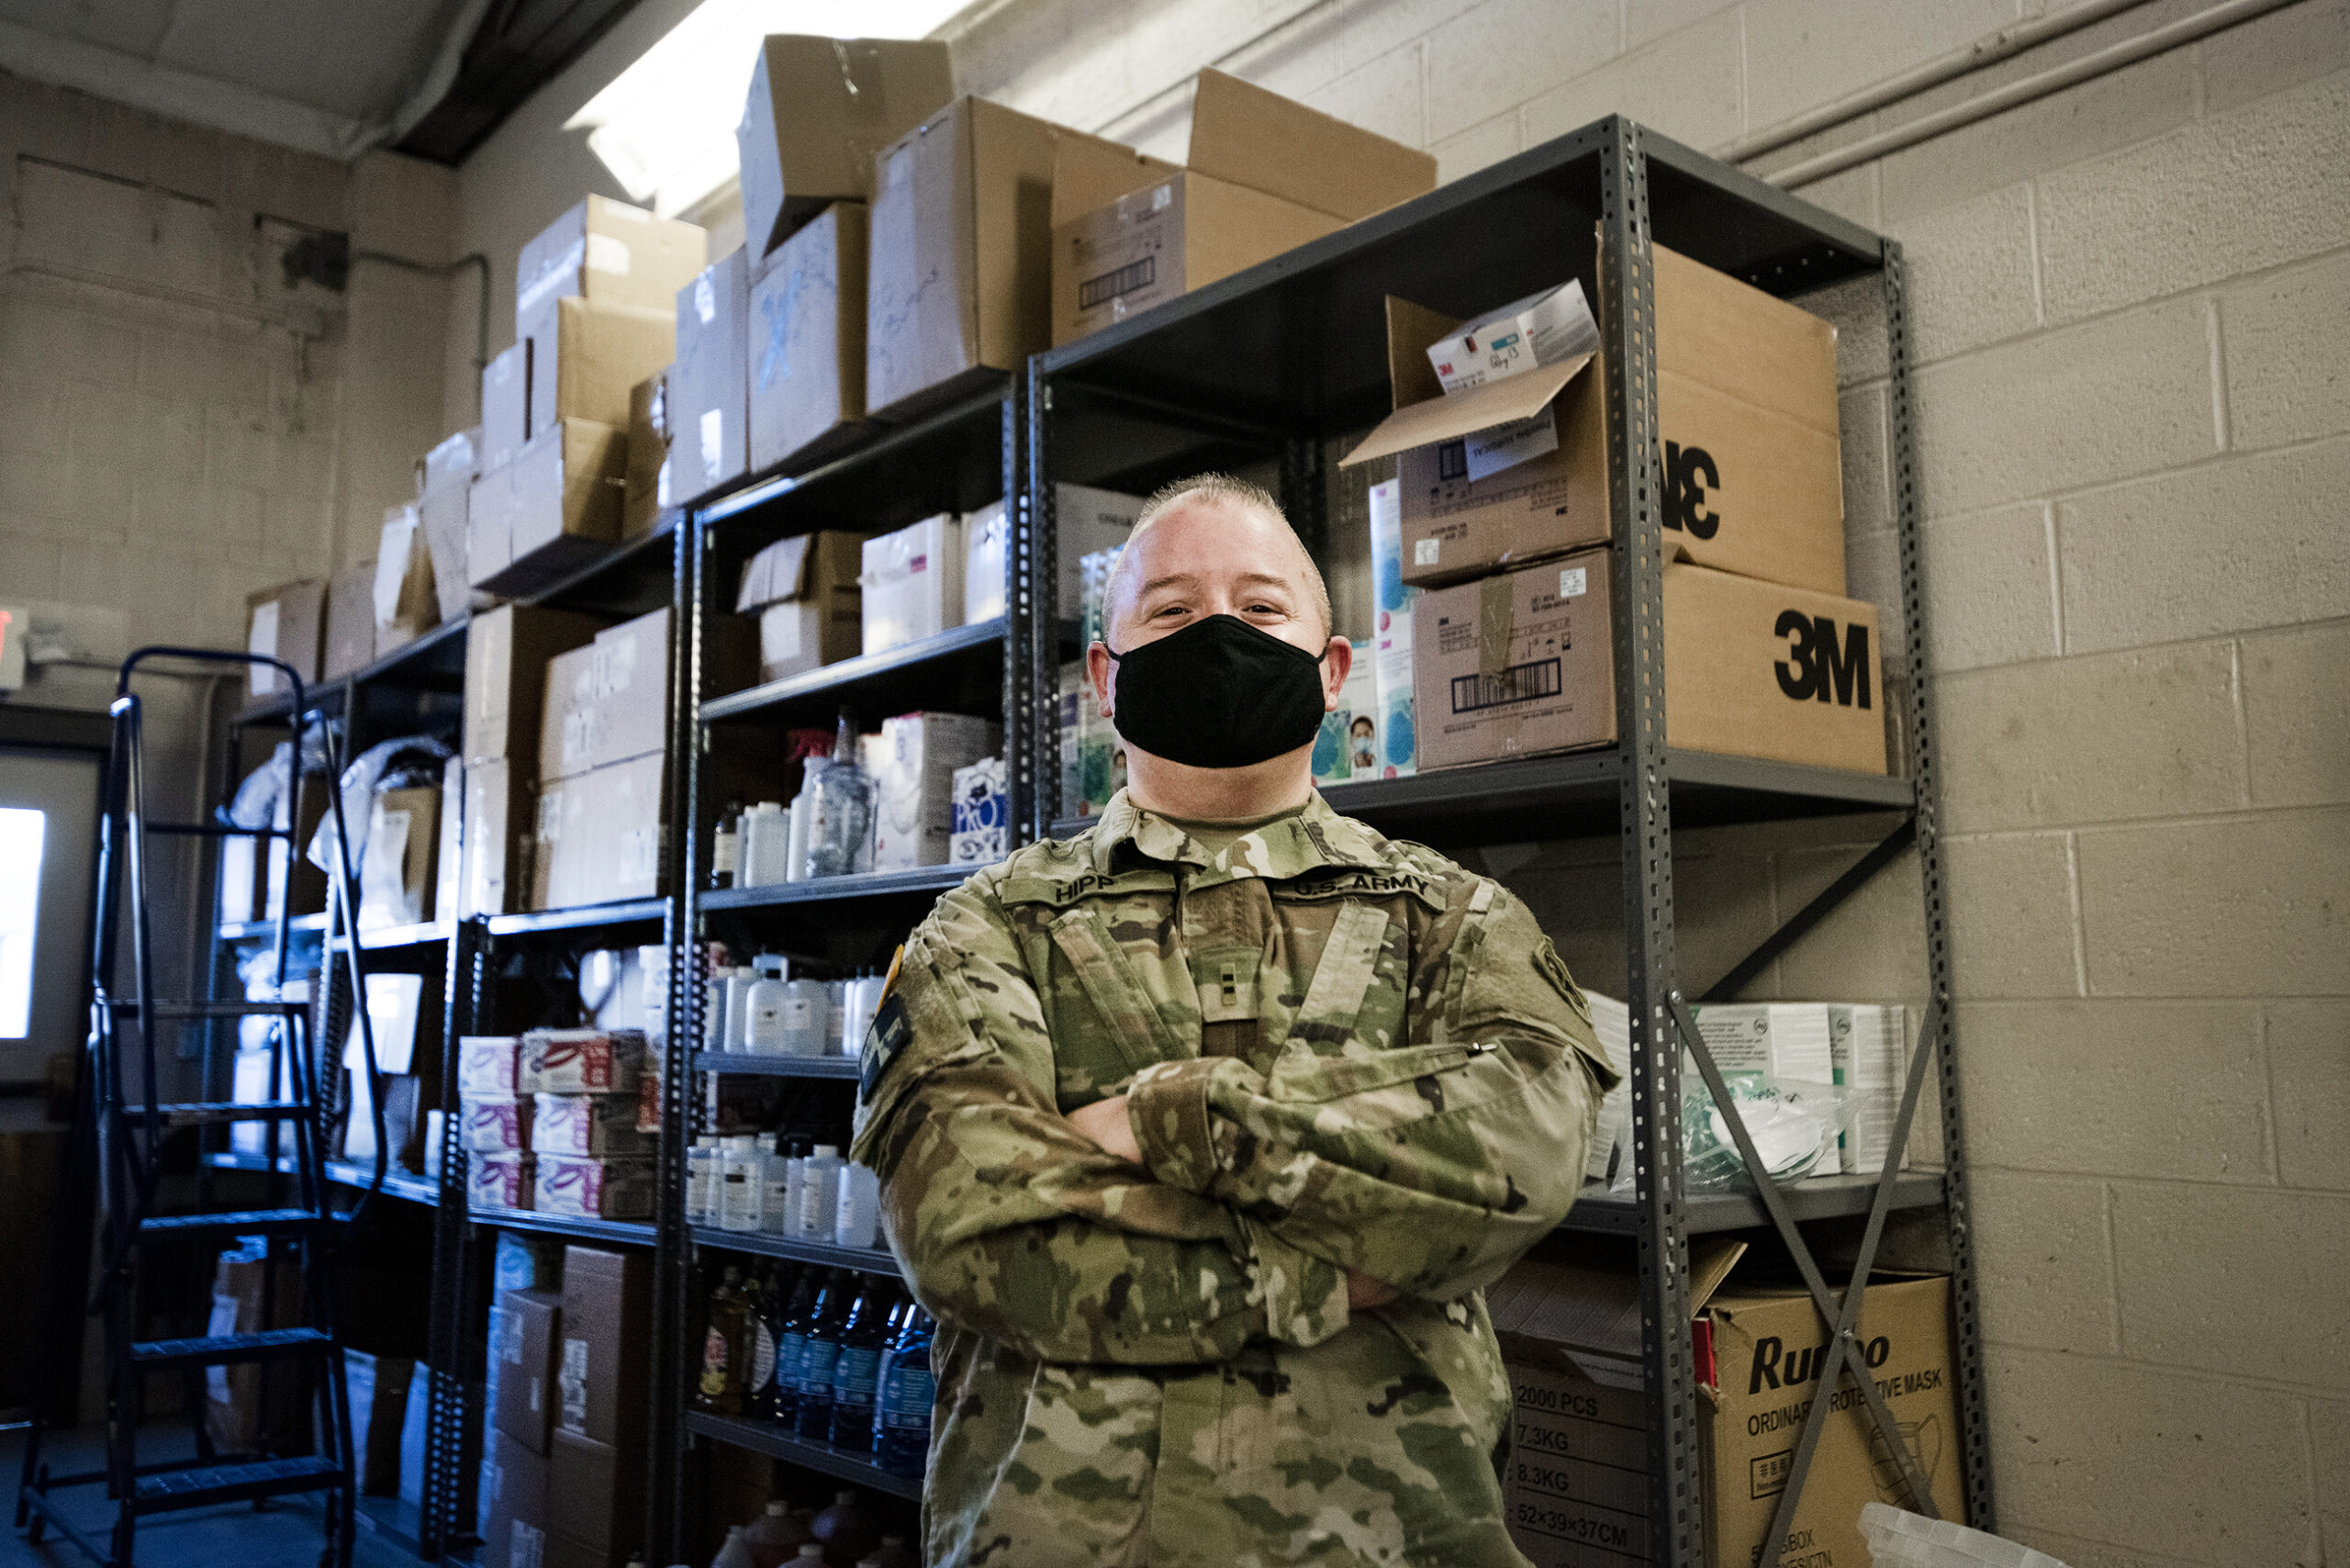 a man in a military uniform and a black face mask stands near shelves of PPE with his arms crossed